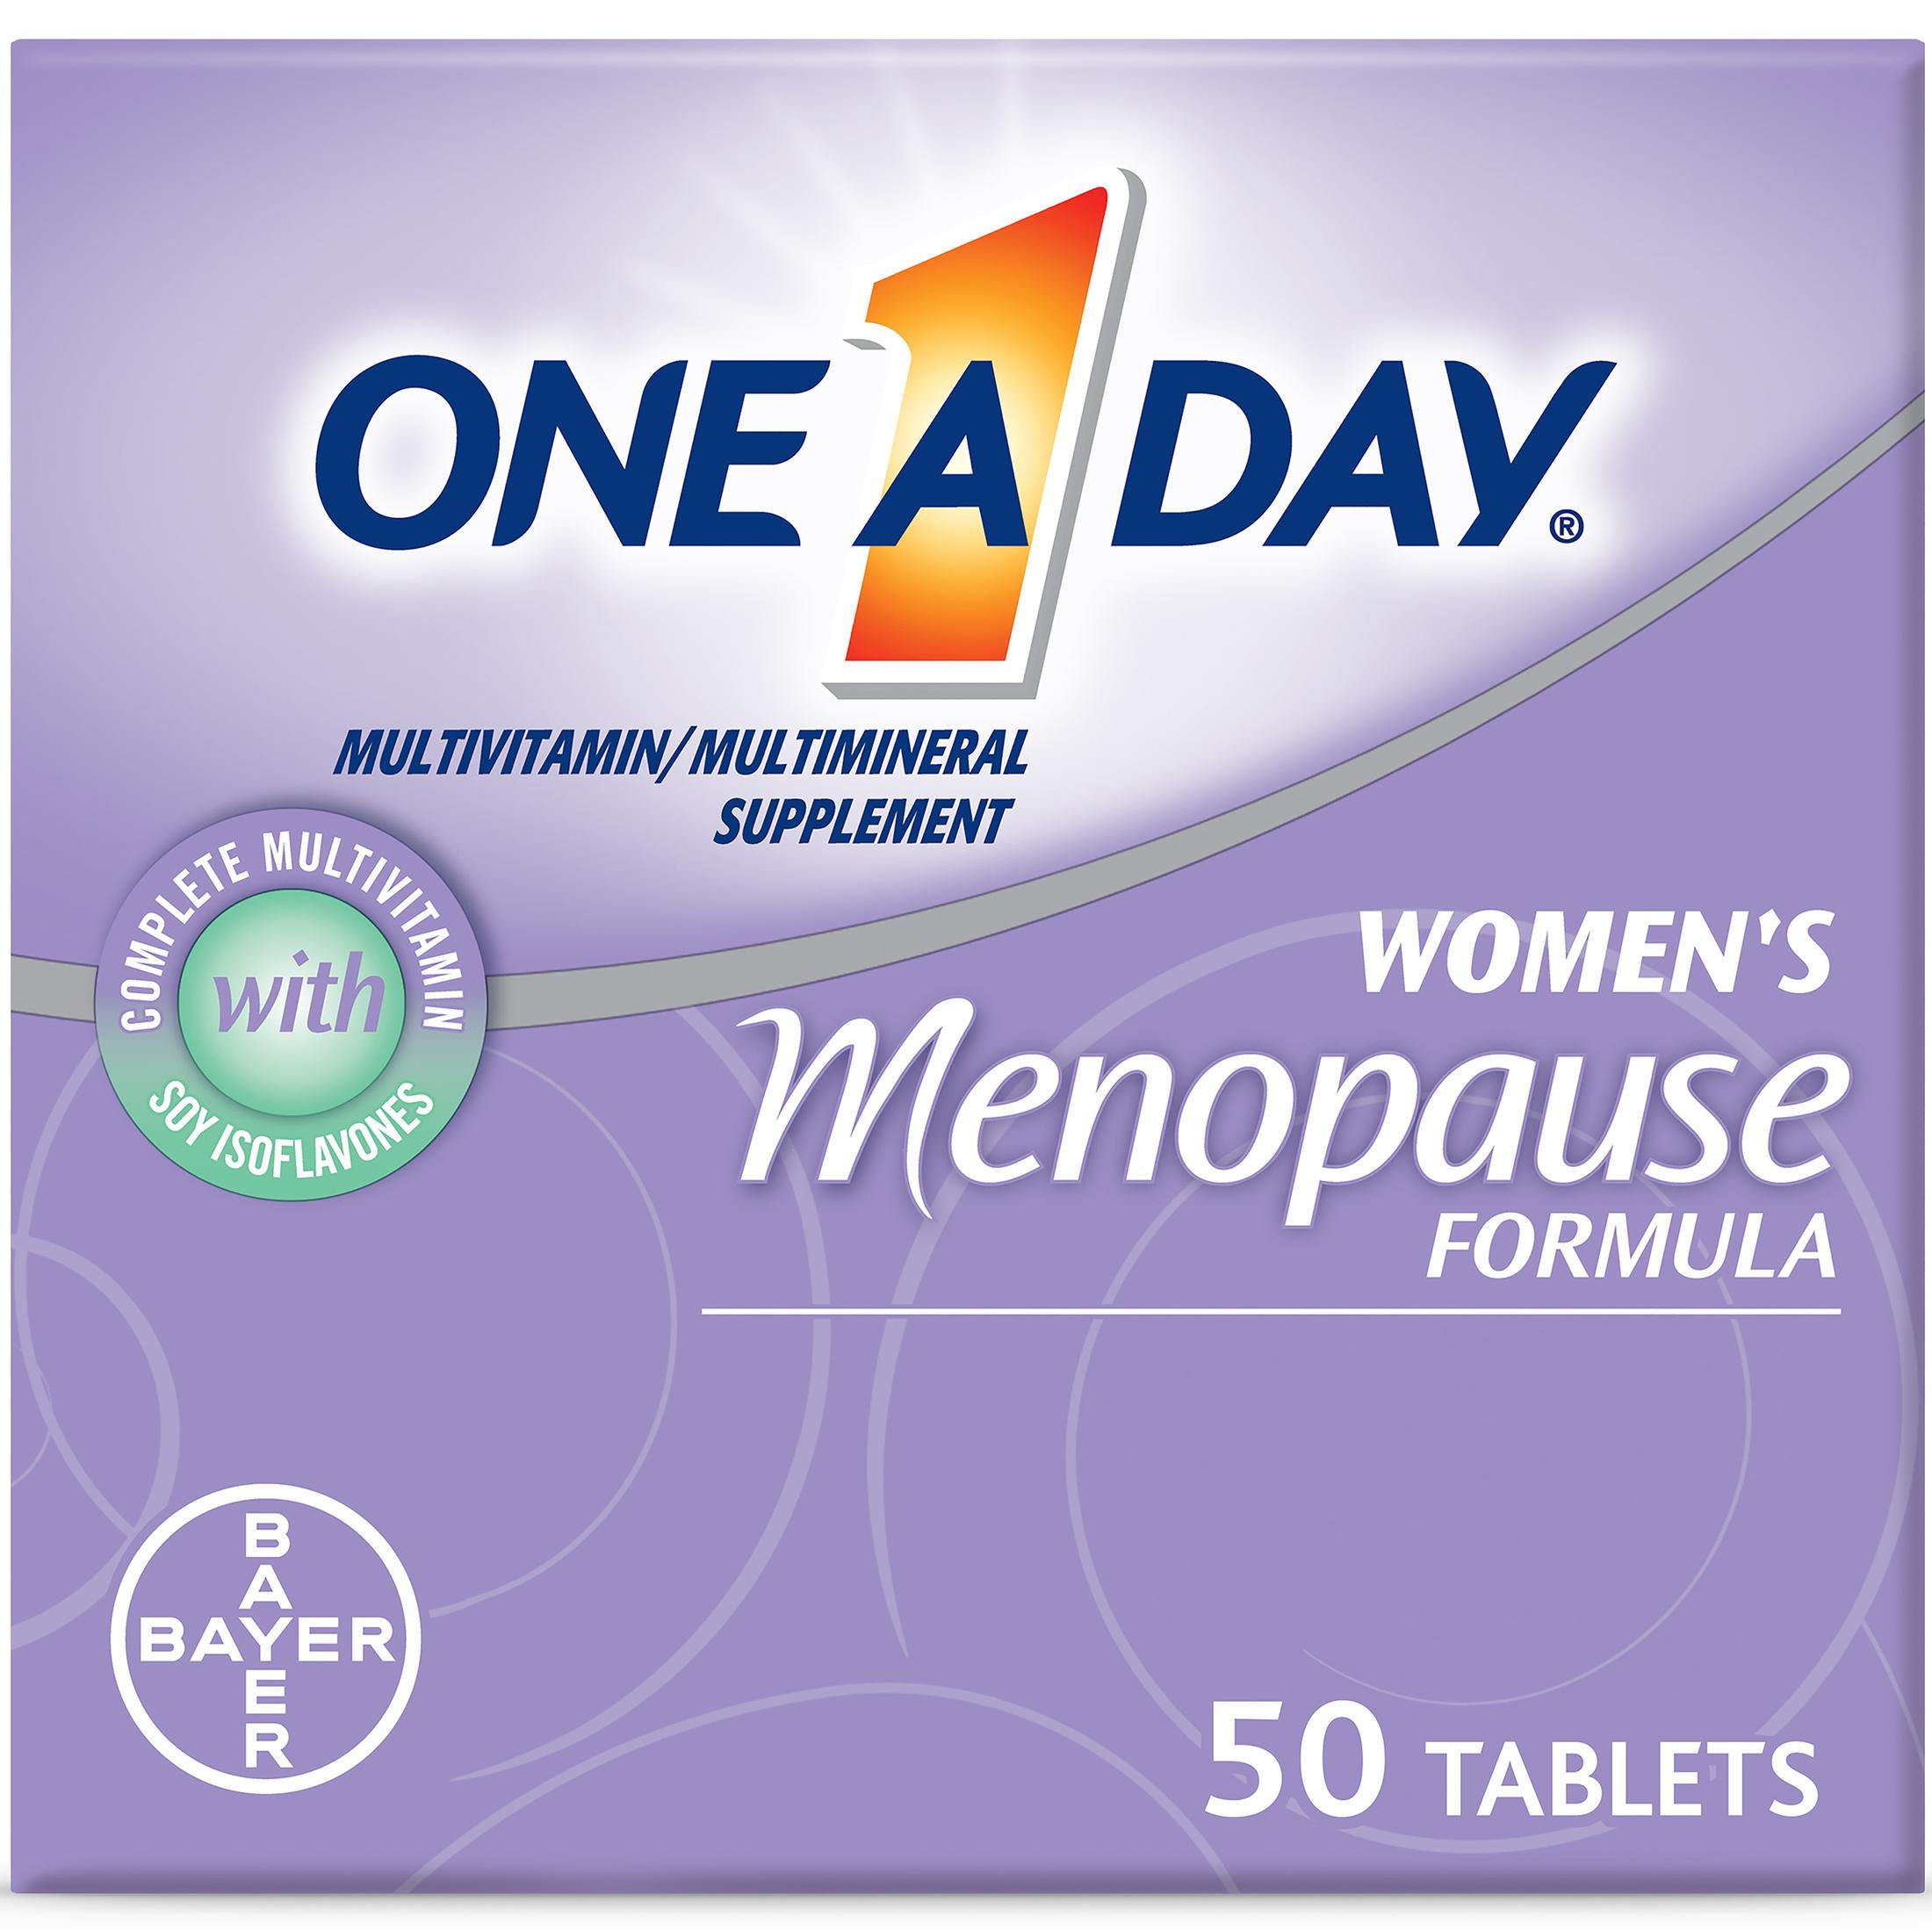 One A Day Women's Menopause Formula Multivitamin Tablets, 50 Count - image 1 of 10